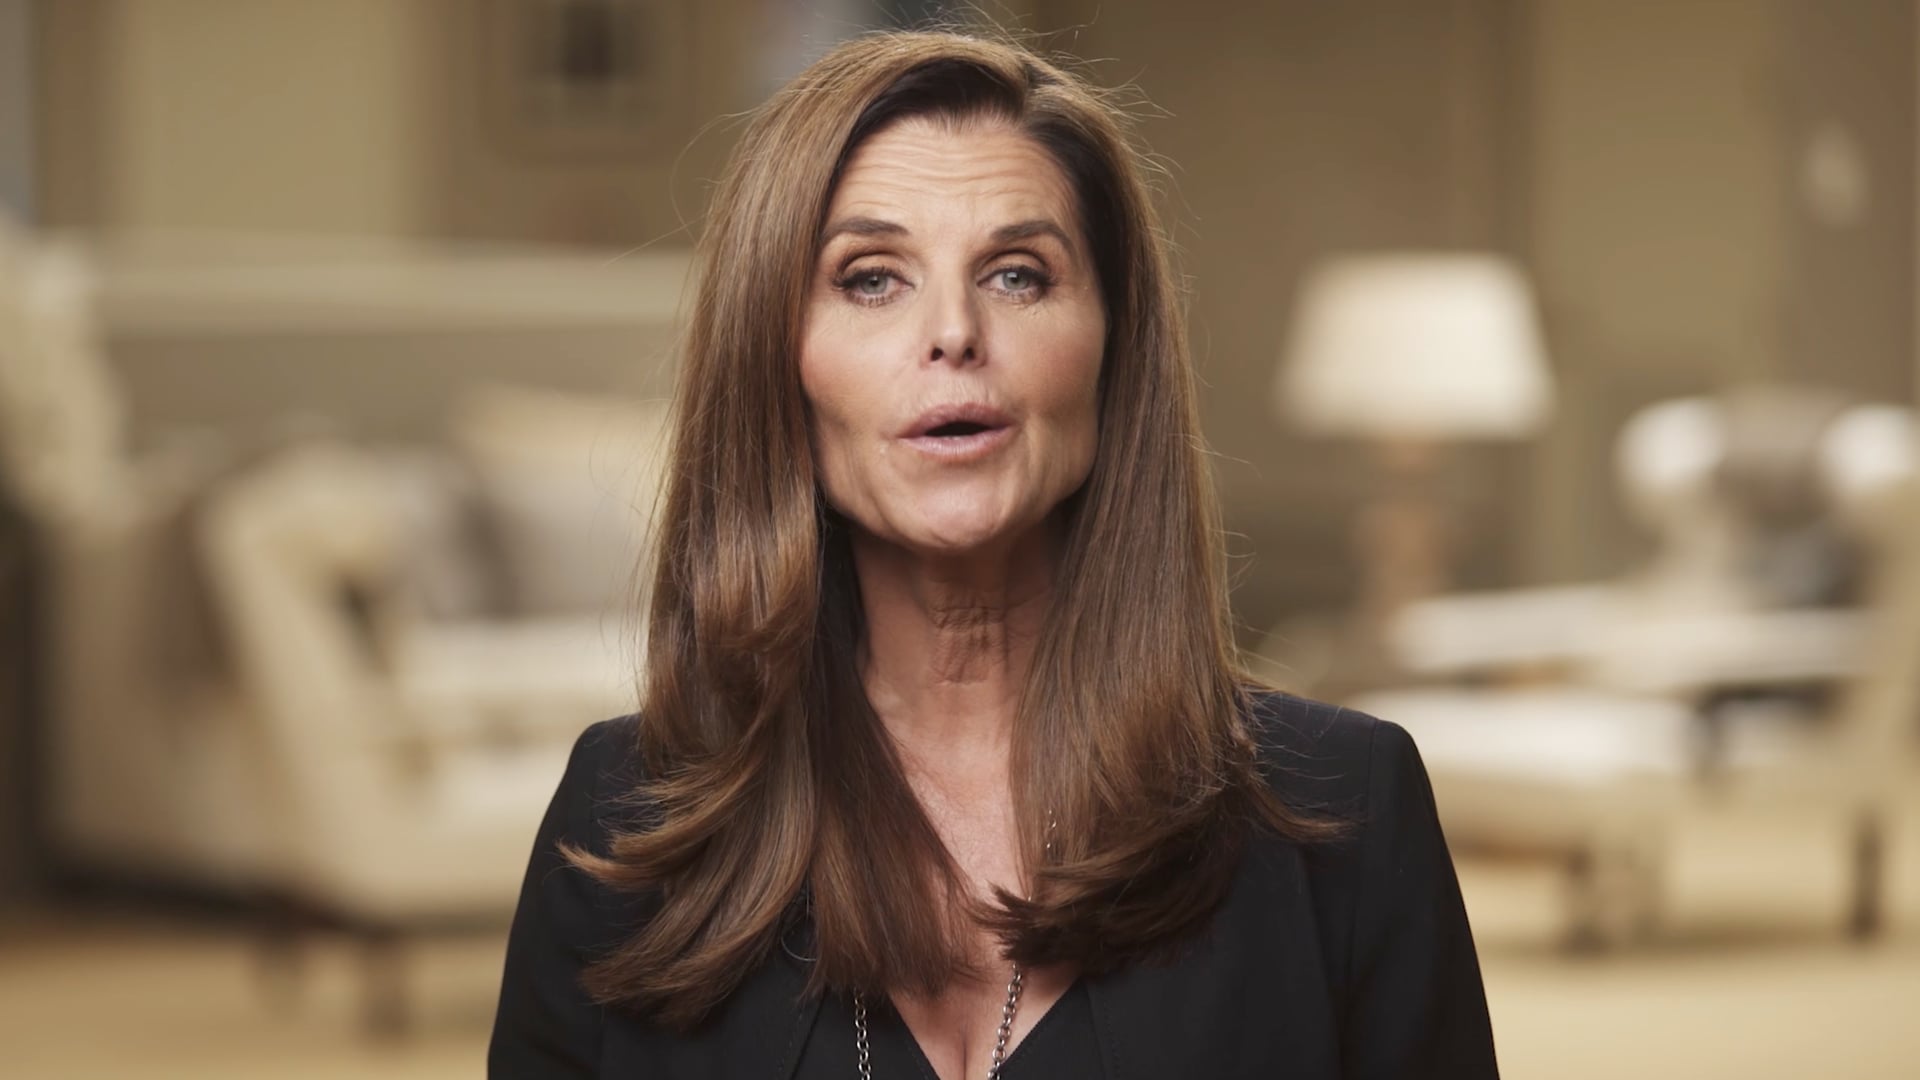 MARIA SHRIVER'S ARCHITECTS OF CHANGE WITH FORD